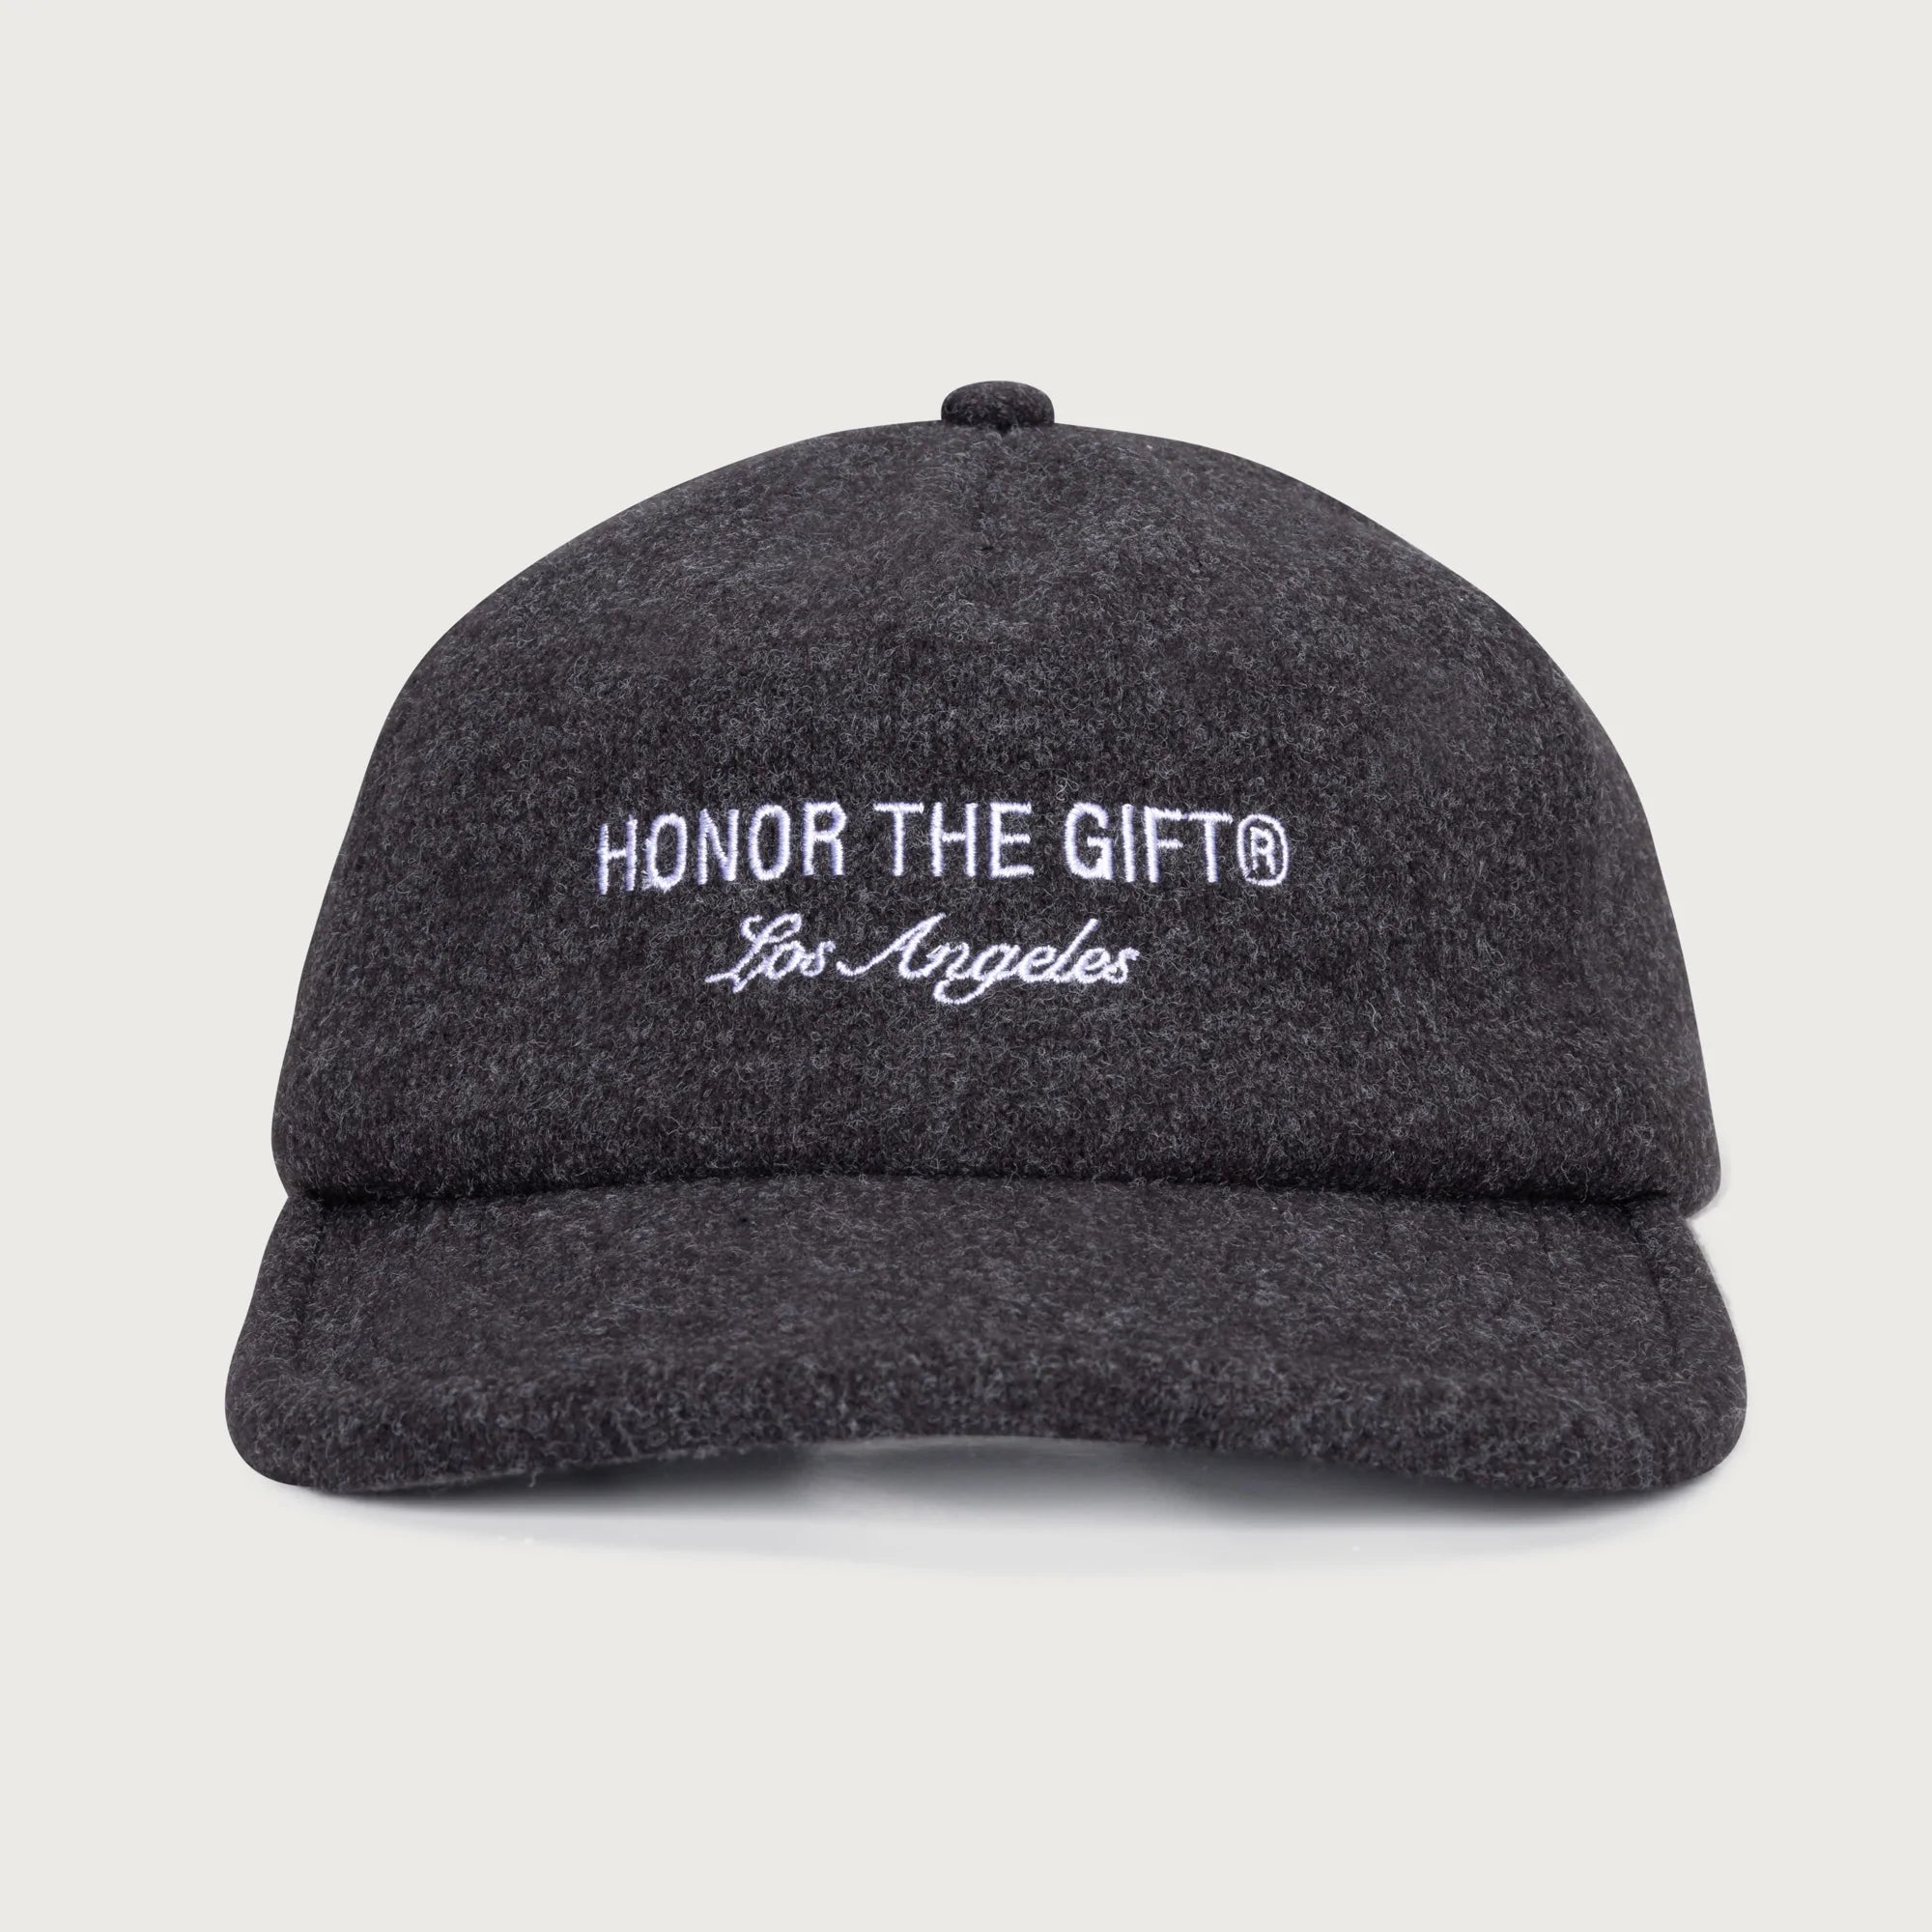 Los Angeles Knitted Cap